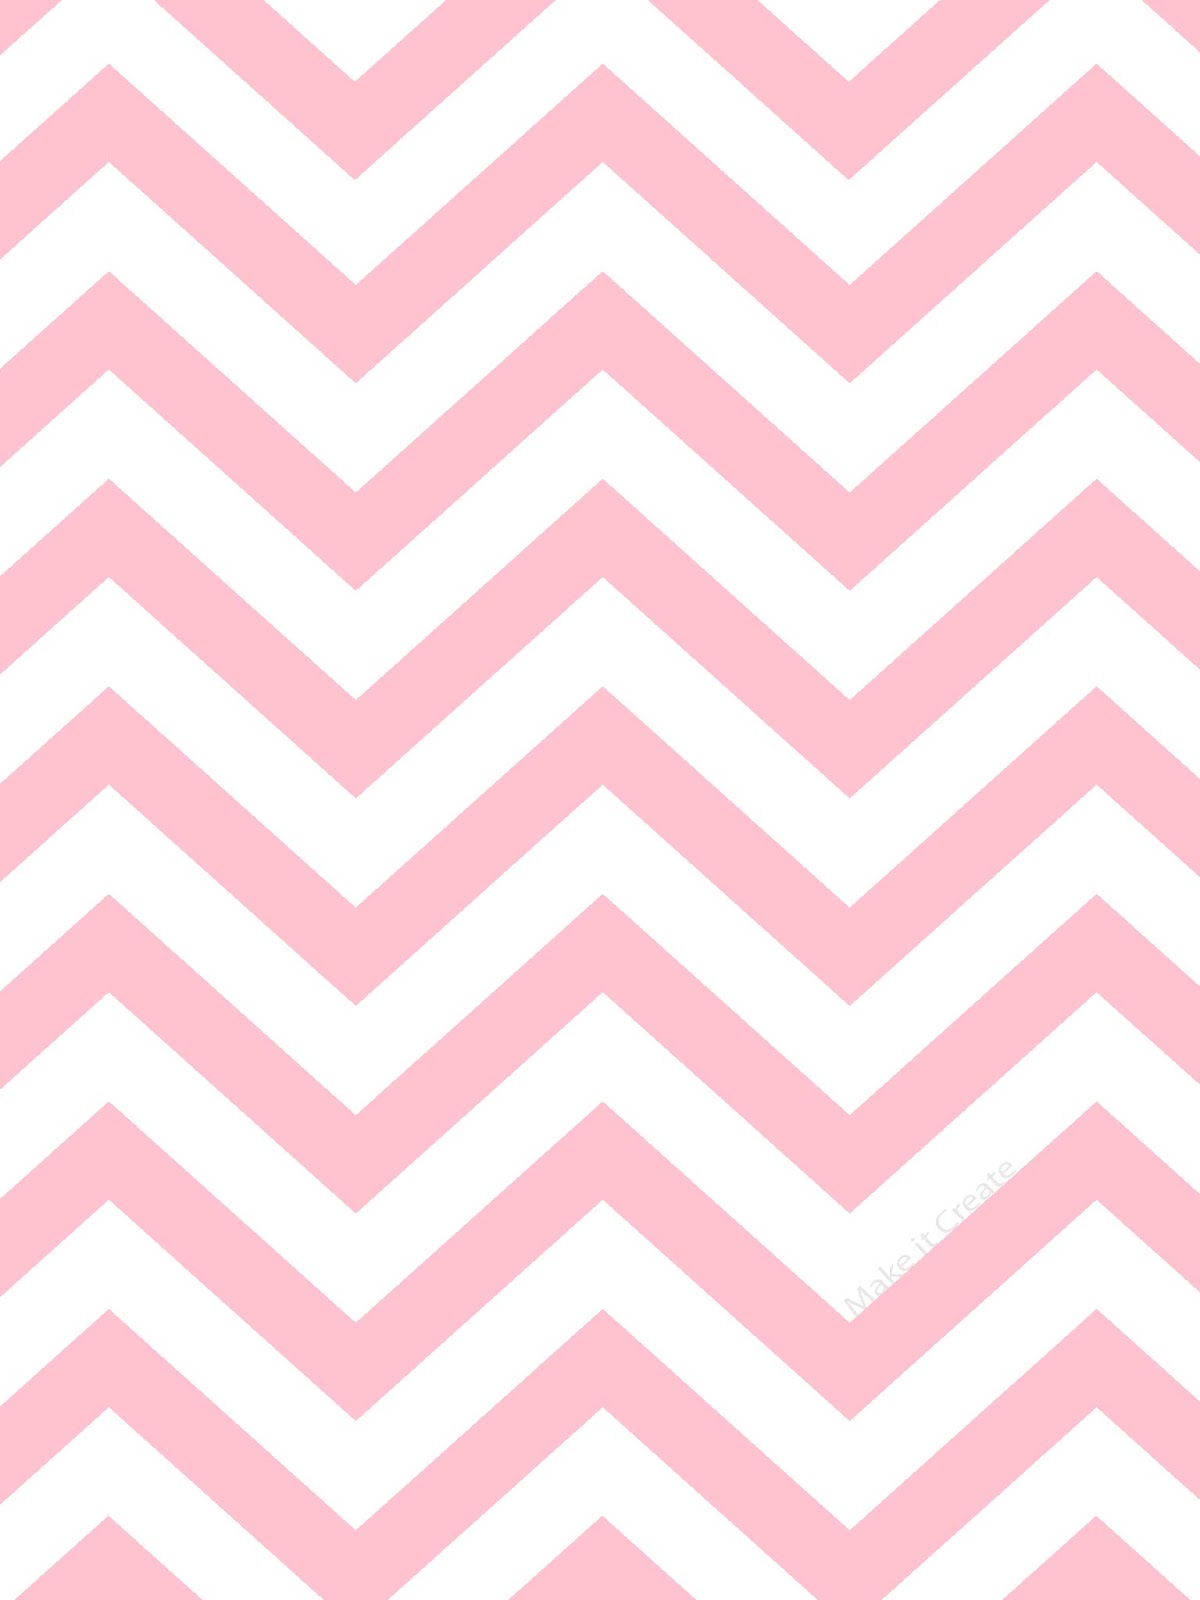 Clipart background zigzag lines pink